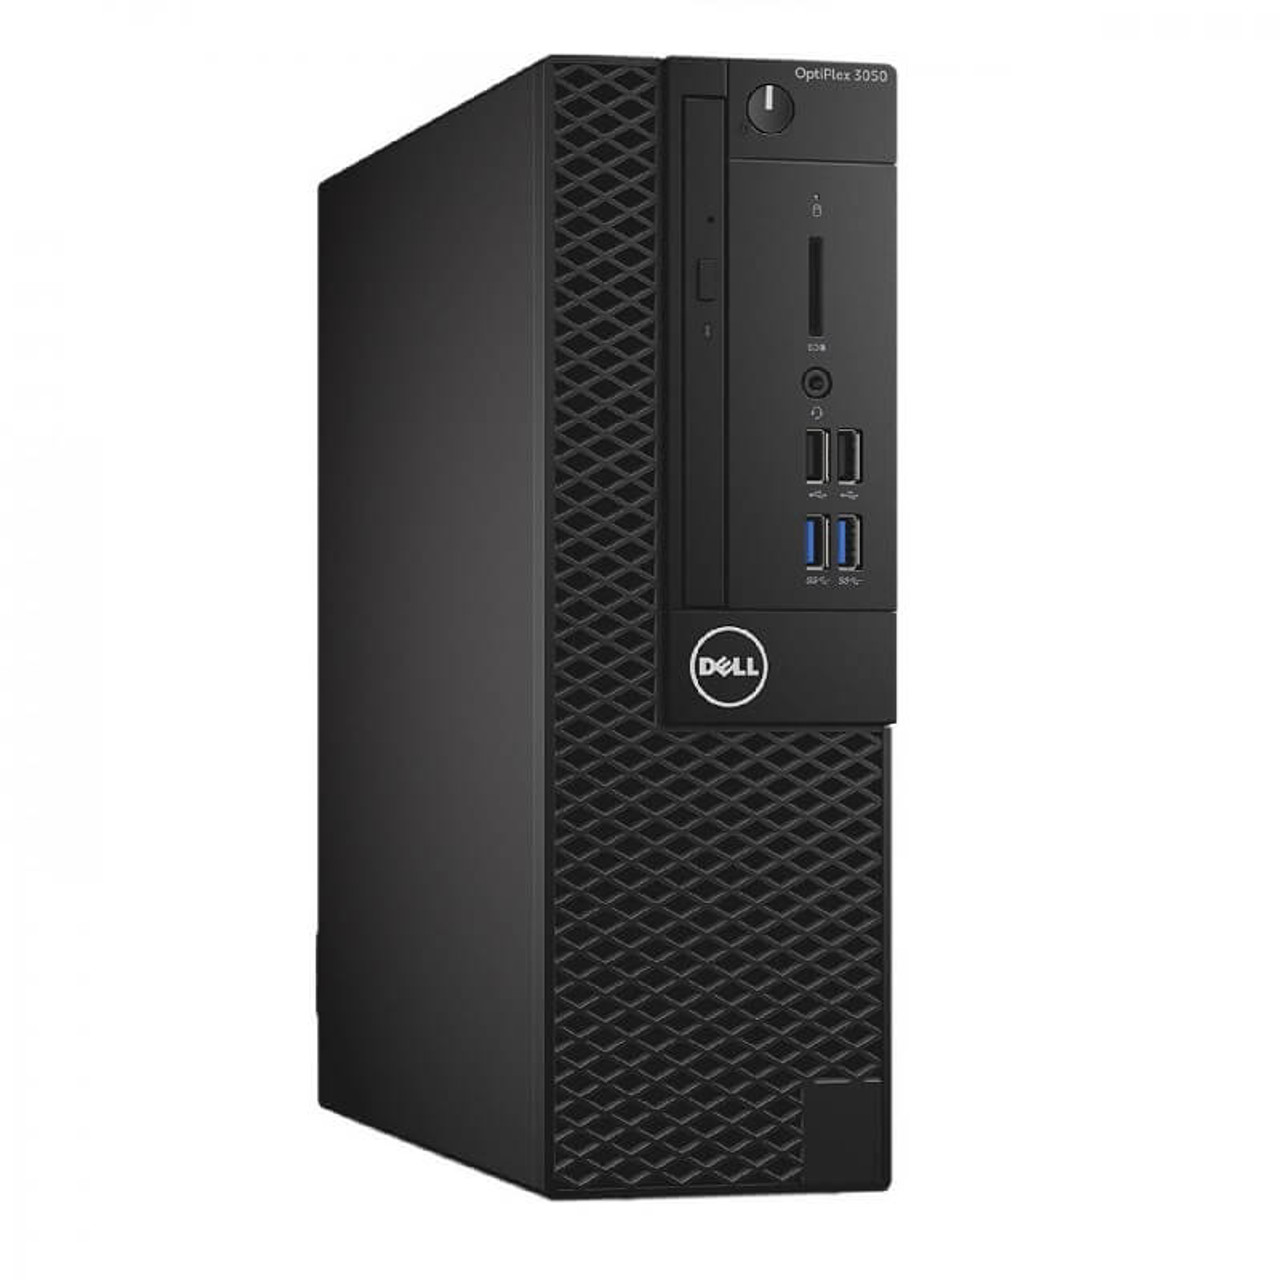 Dell OptiPlex 5050 SFF Intel Core i7-7700 3.6GHz up to 4.2GHz 8GB ...